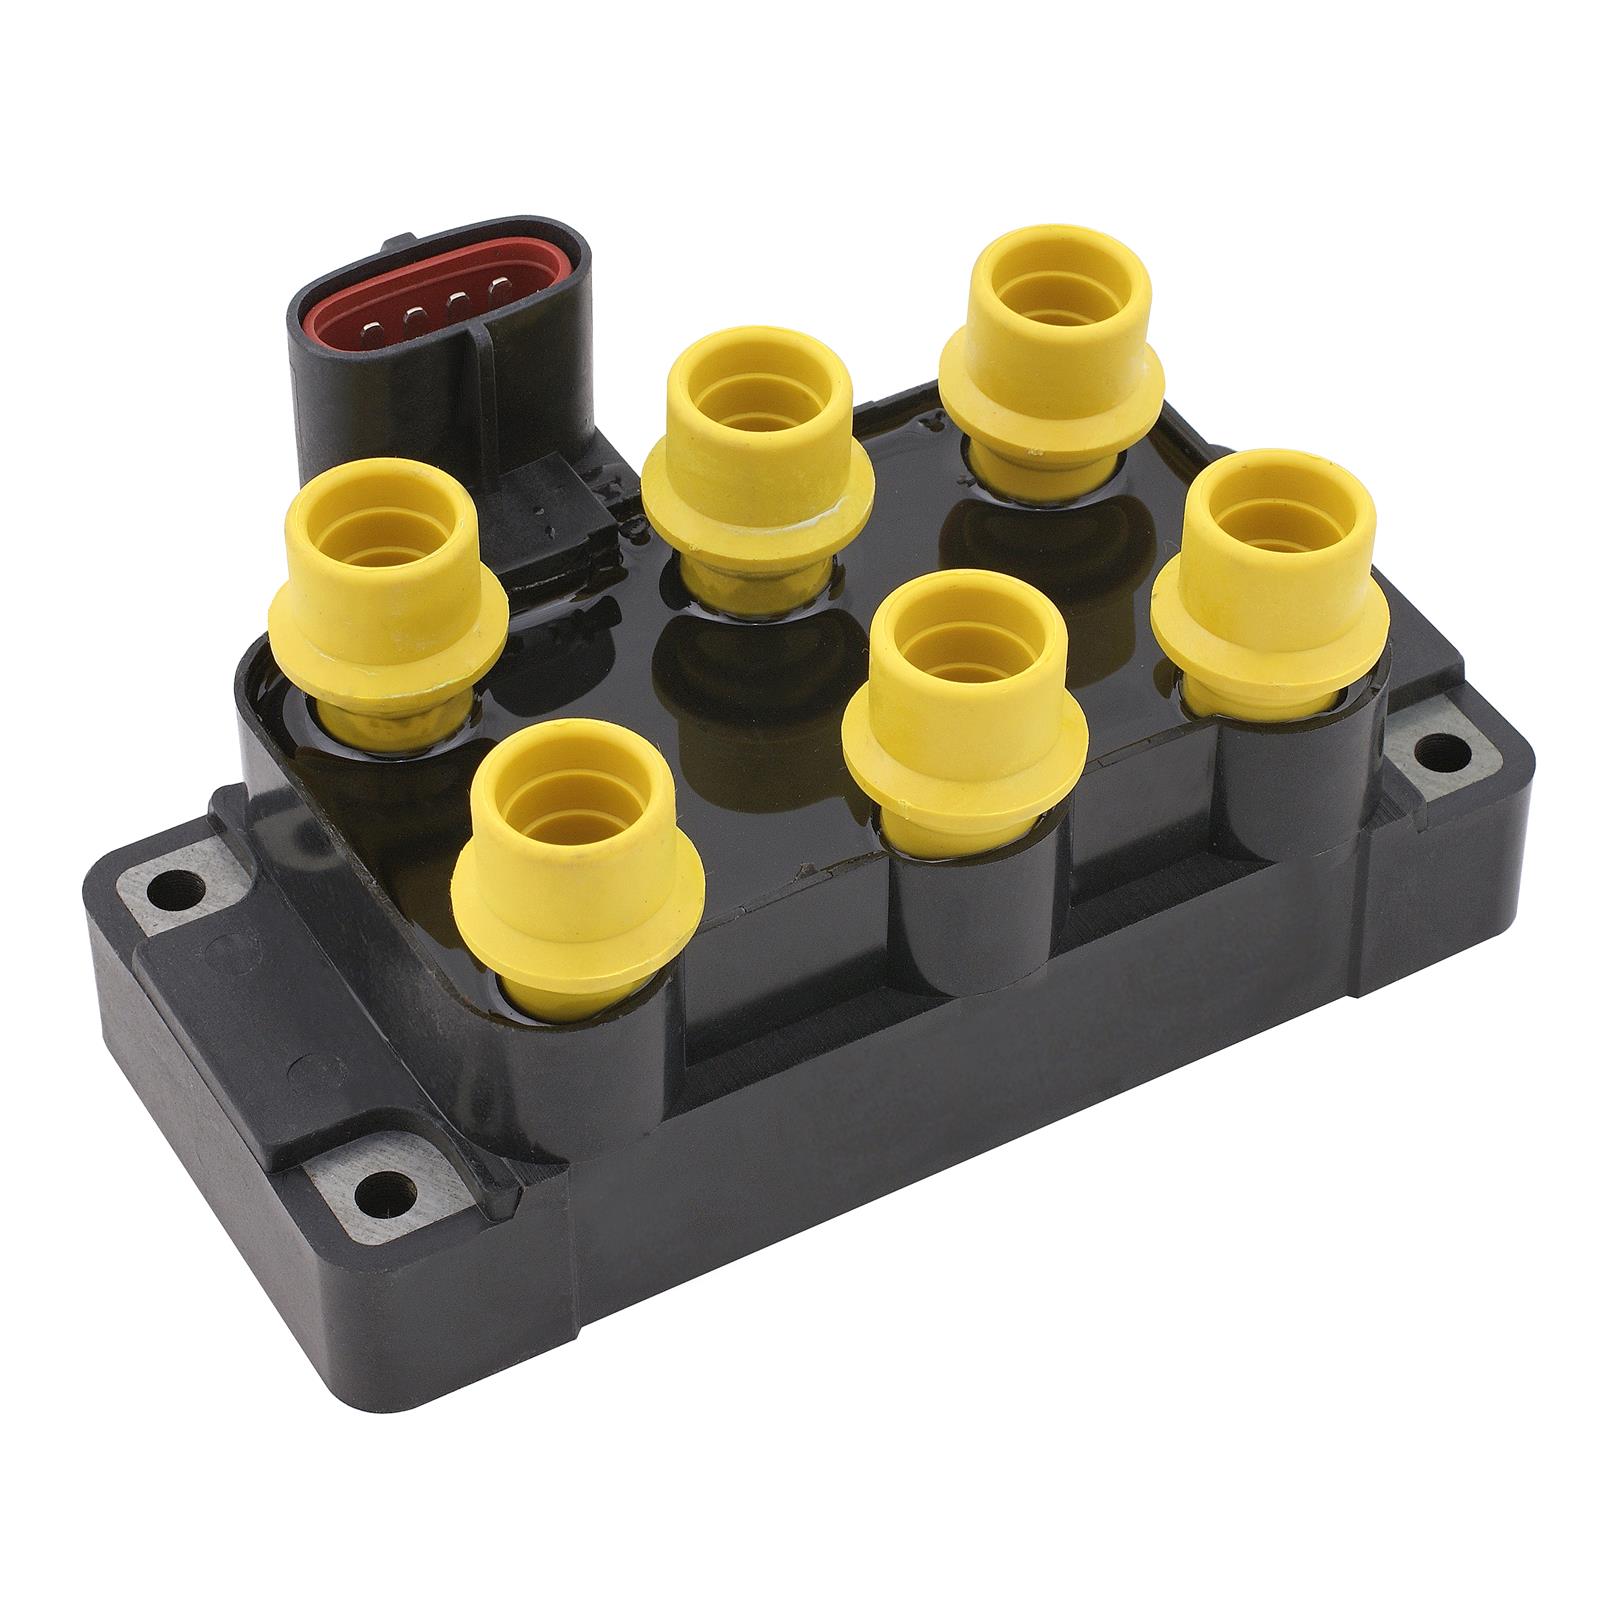 www.meinvoyager.de - IGNITION COILS